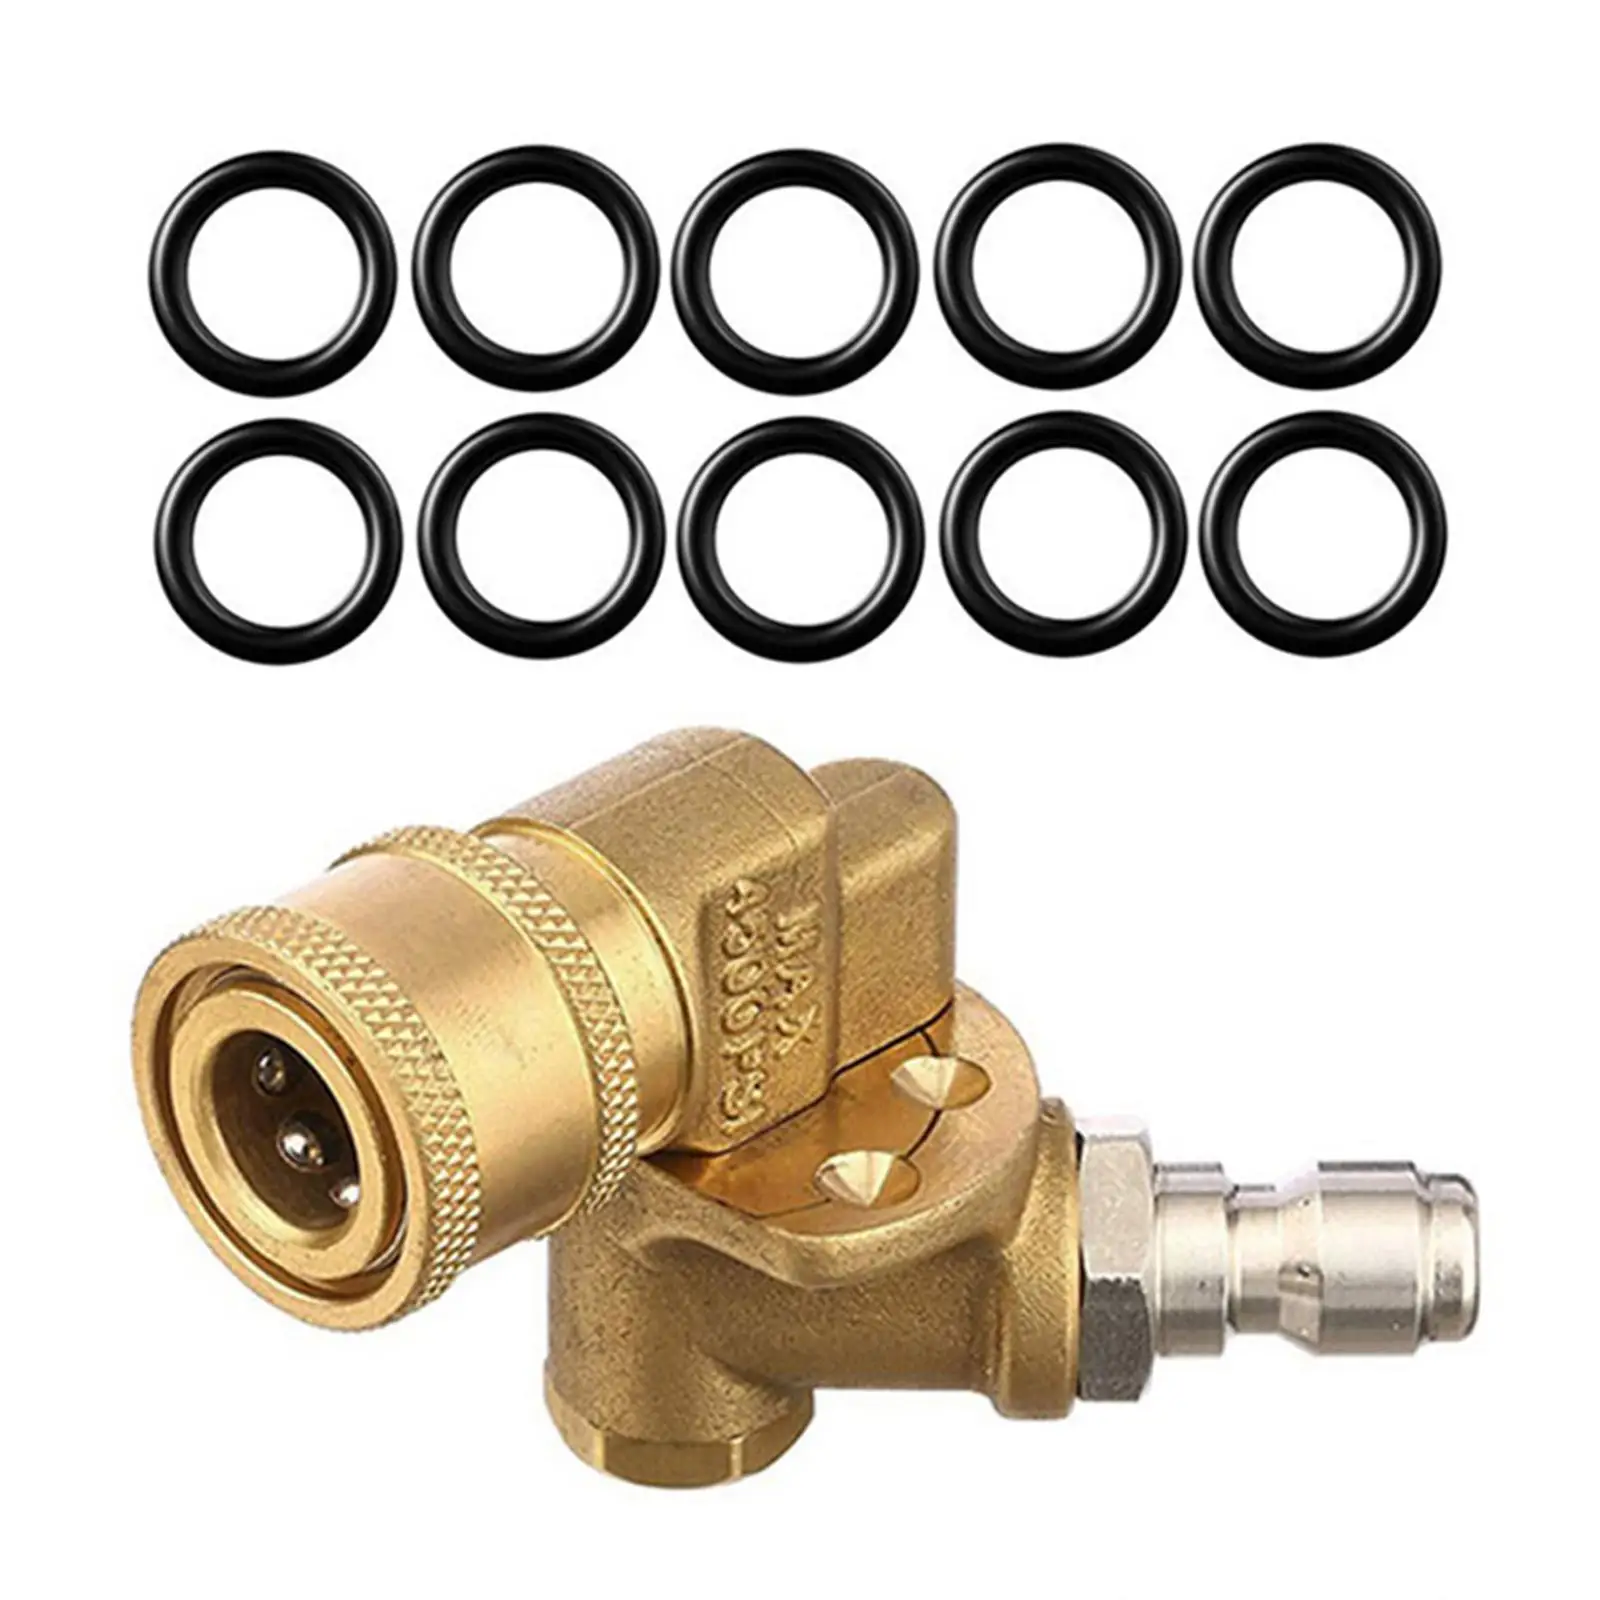 Quick Installation 7 Angle Couple for Pressure Washer Nozzle Tips Rotation Cleaner Attachment 1/4 inch Sprayer Nozzle